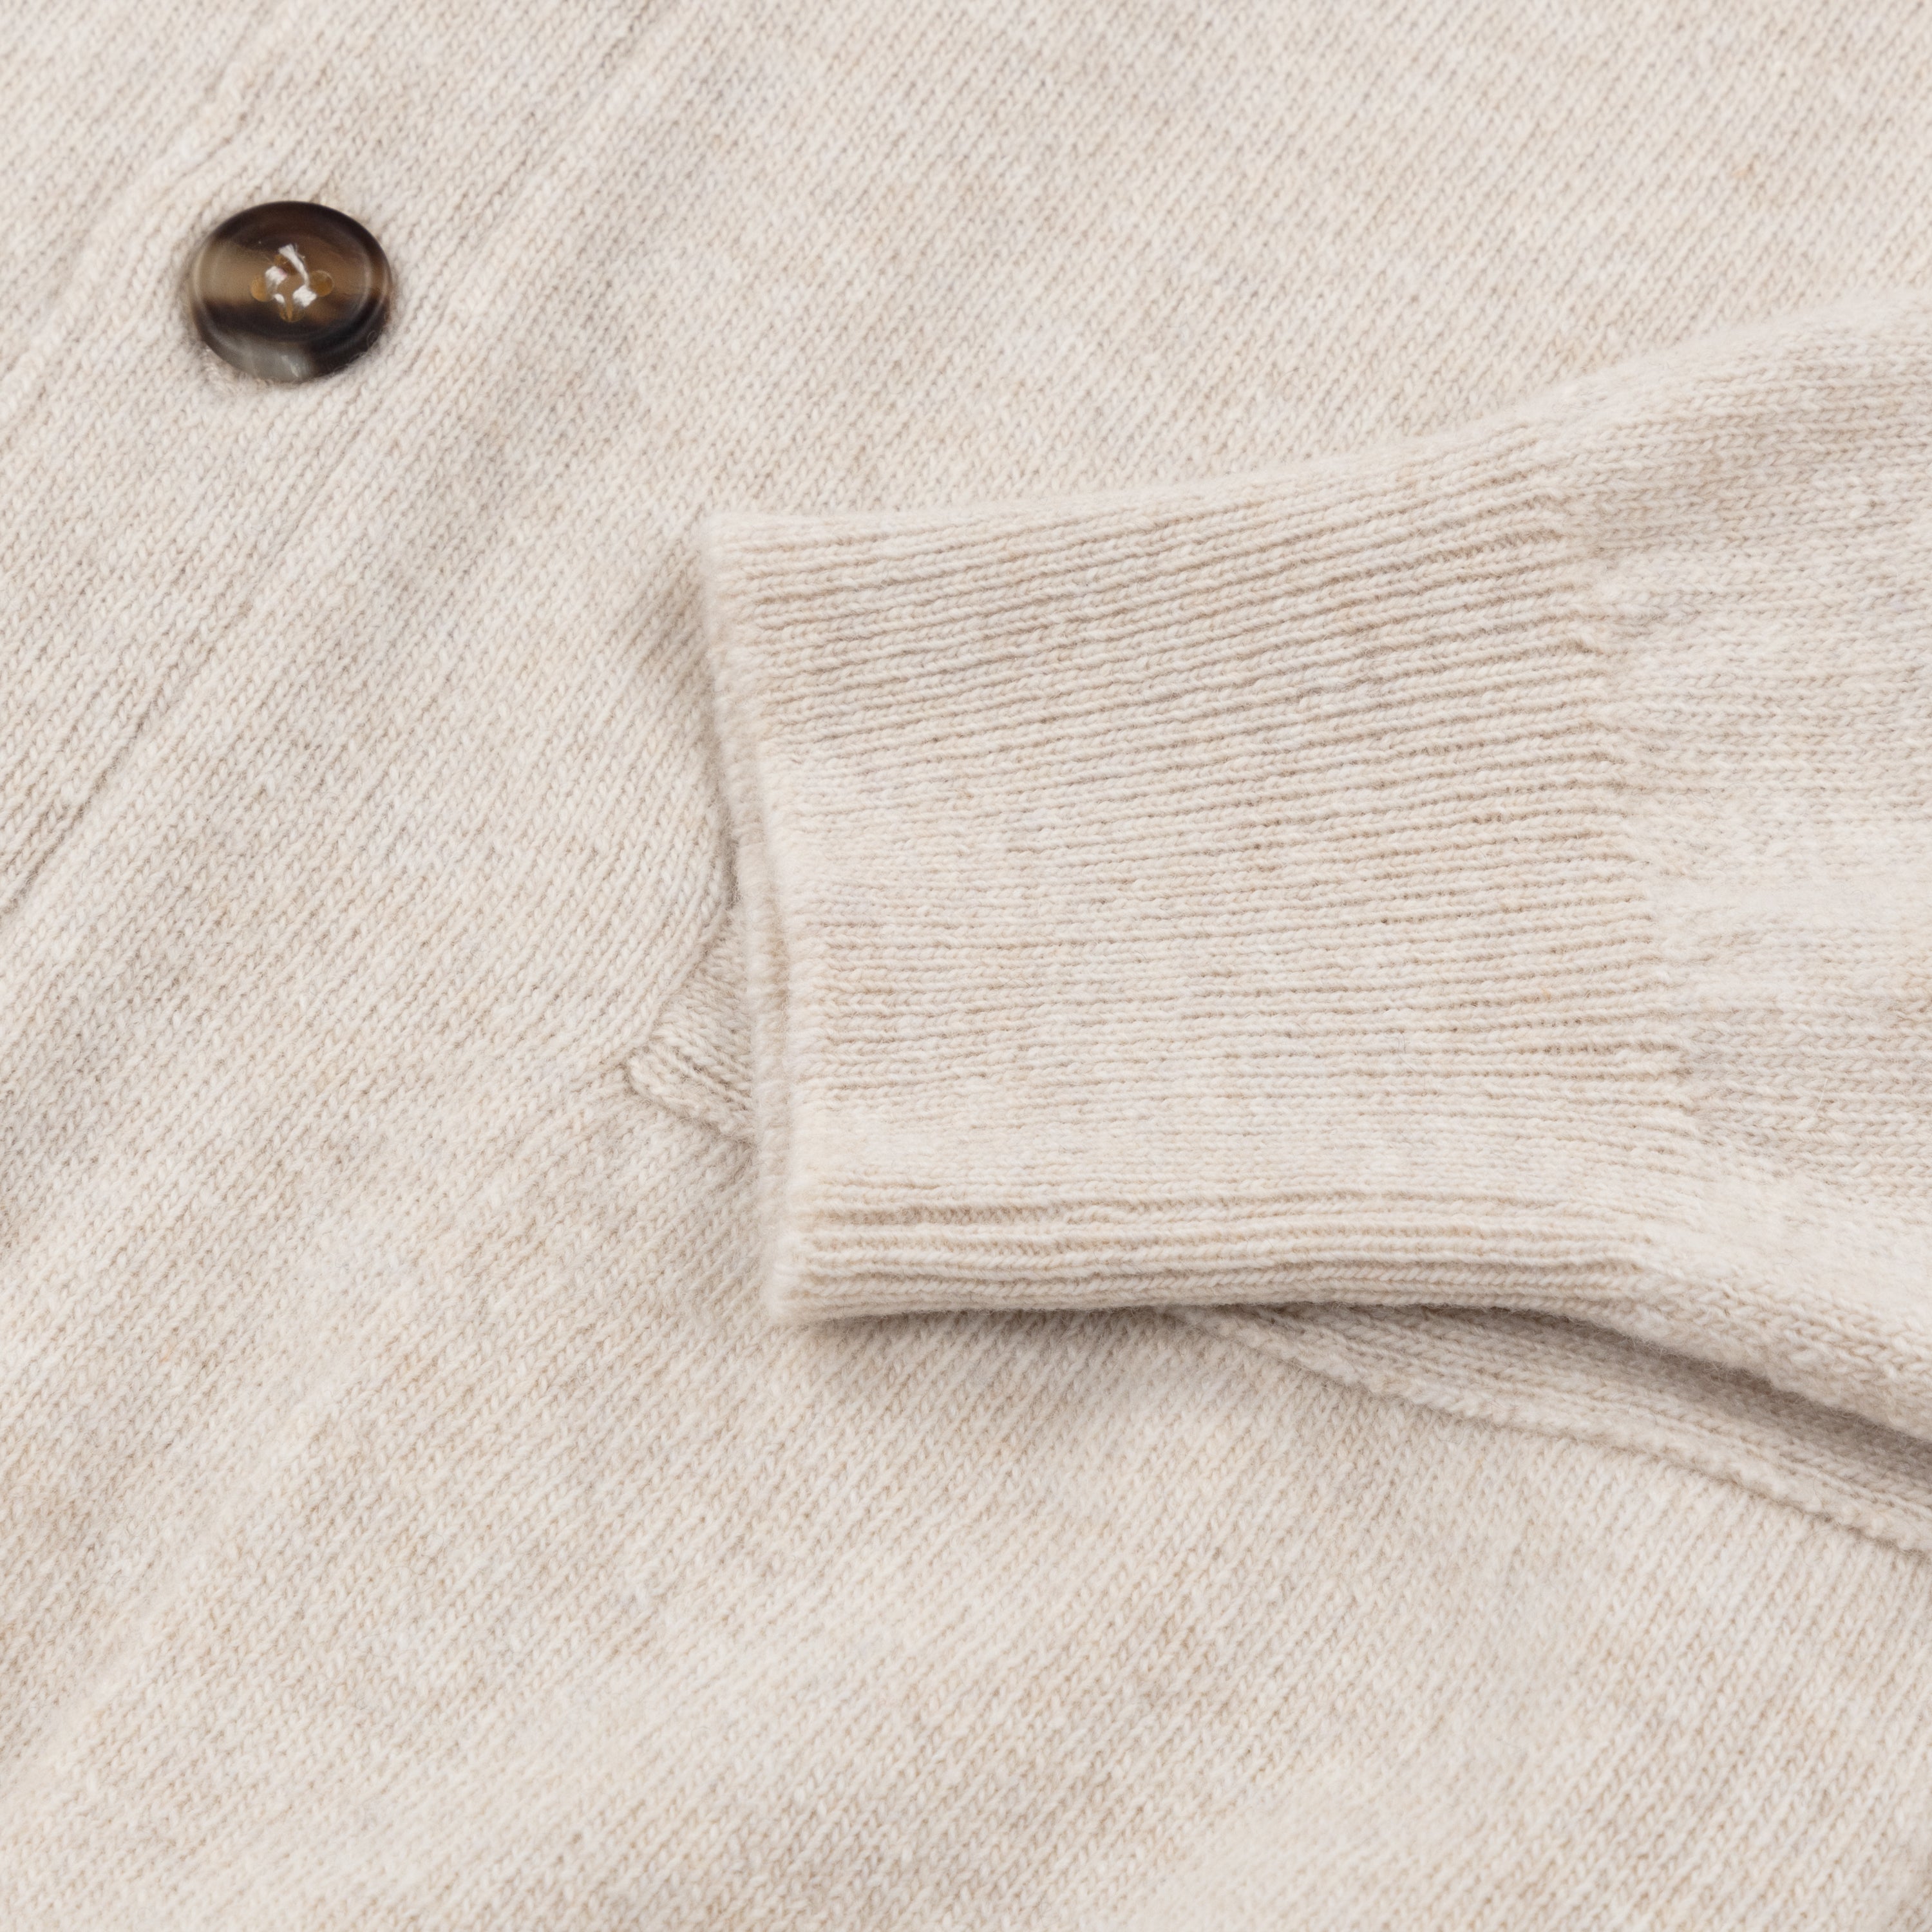 Superfine lambswool tennis cardigan in oatmeal - Colhay's